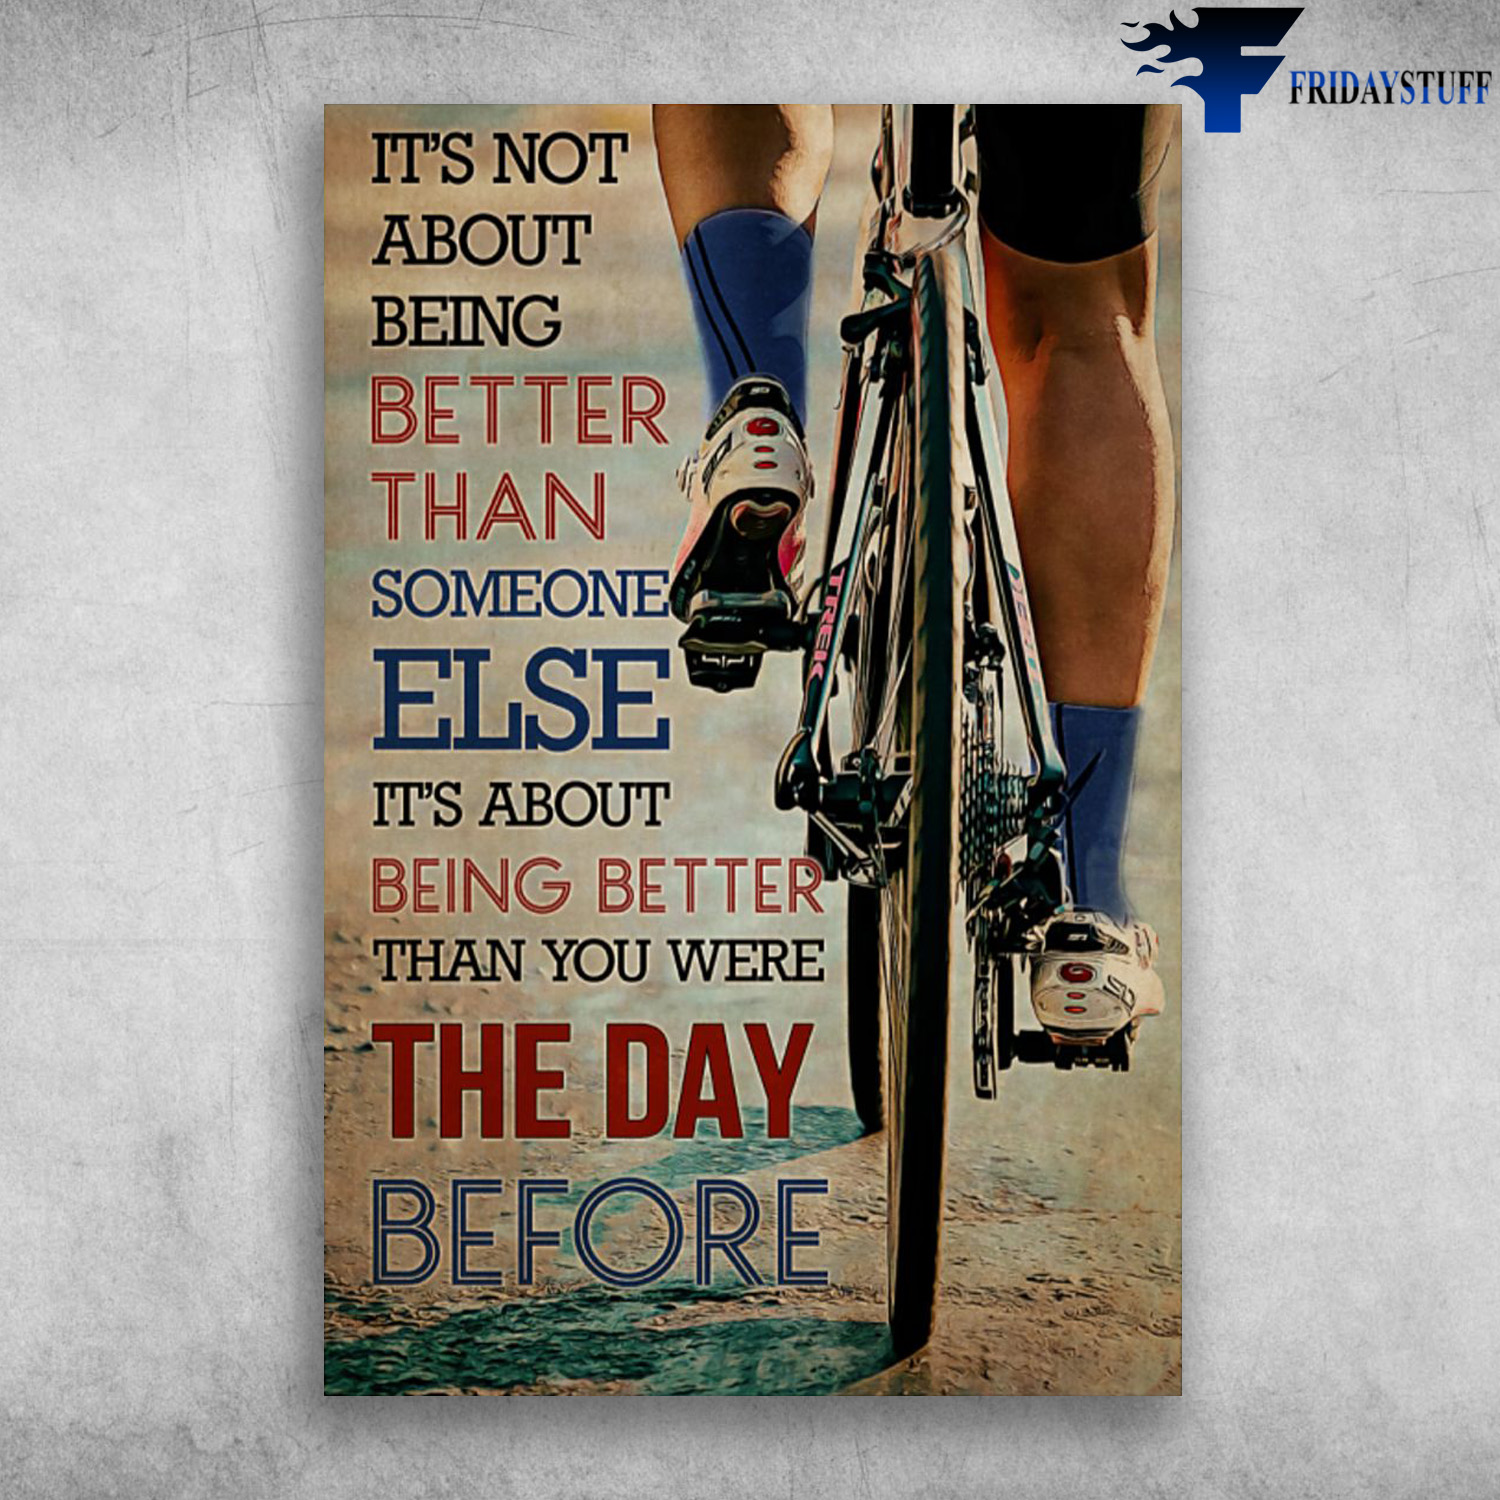 Cycling Man - It's Not About Being Better Than Someone Else, It's About Beinf Better Than You Were The Day Before